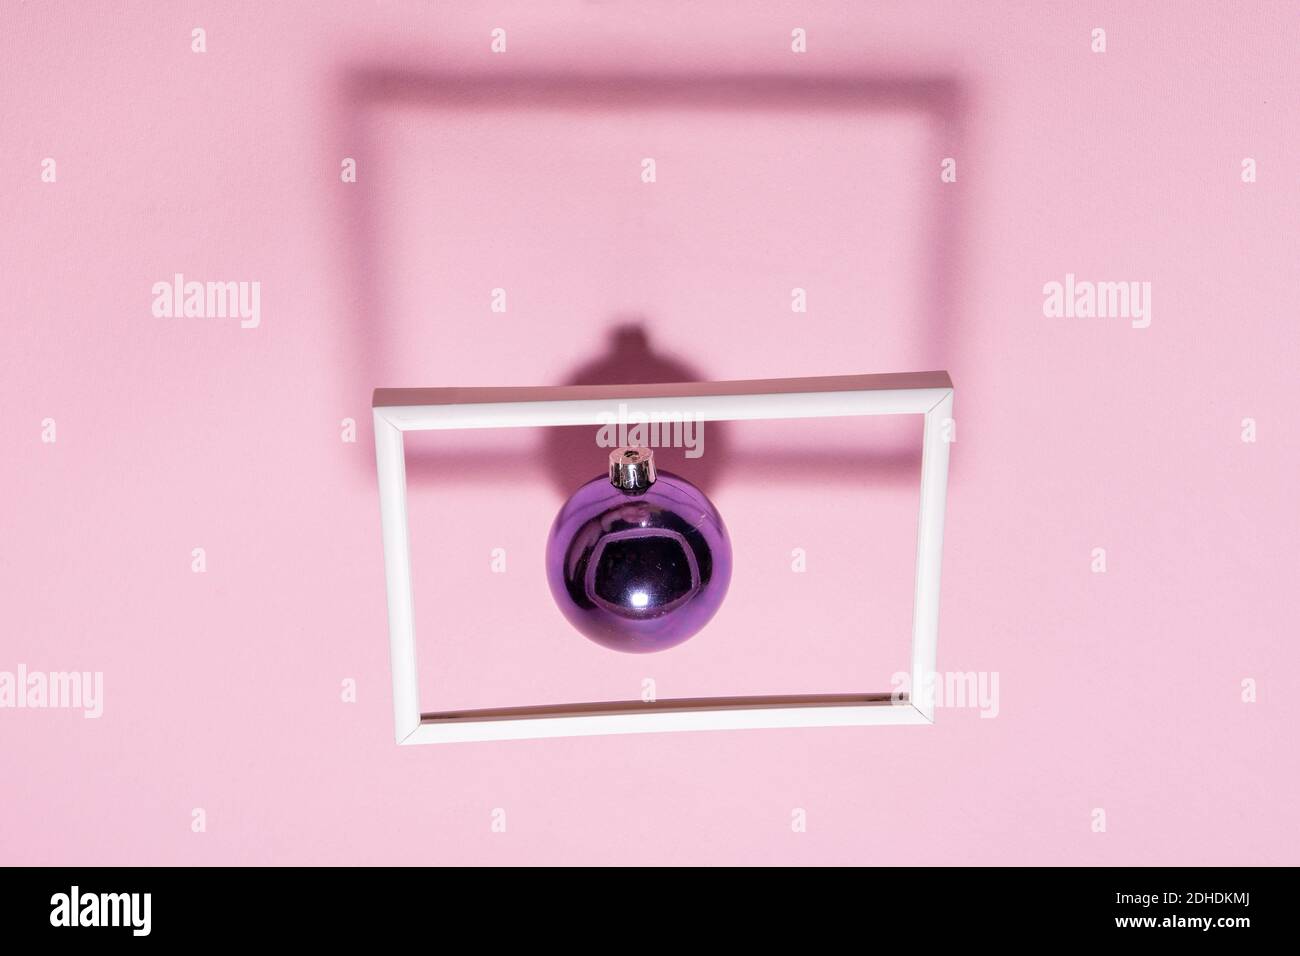 Christmas purple bauble floating in a picture frame with shadows. Abstract Christmas background Stock Photo